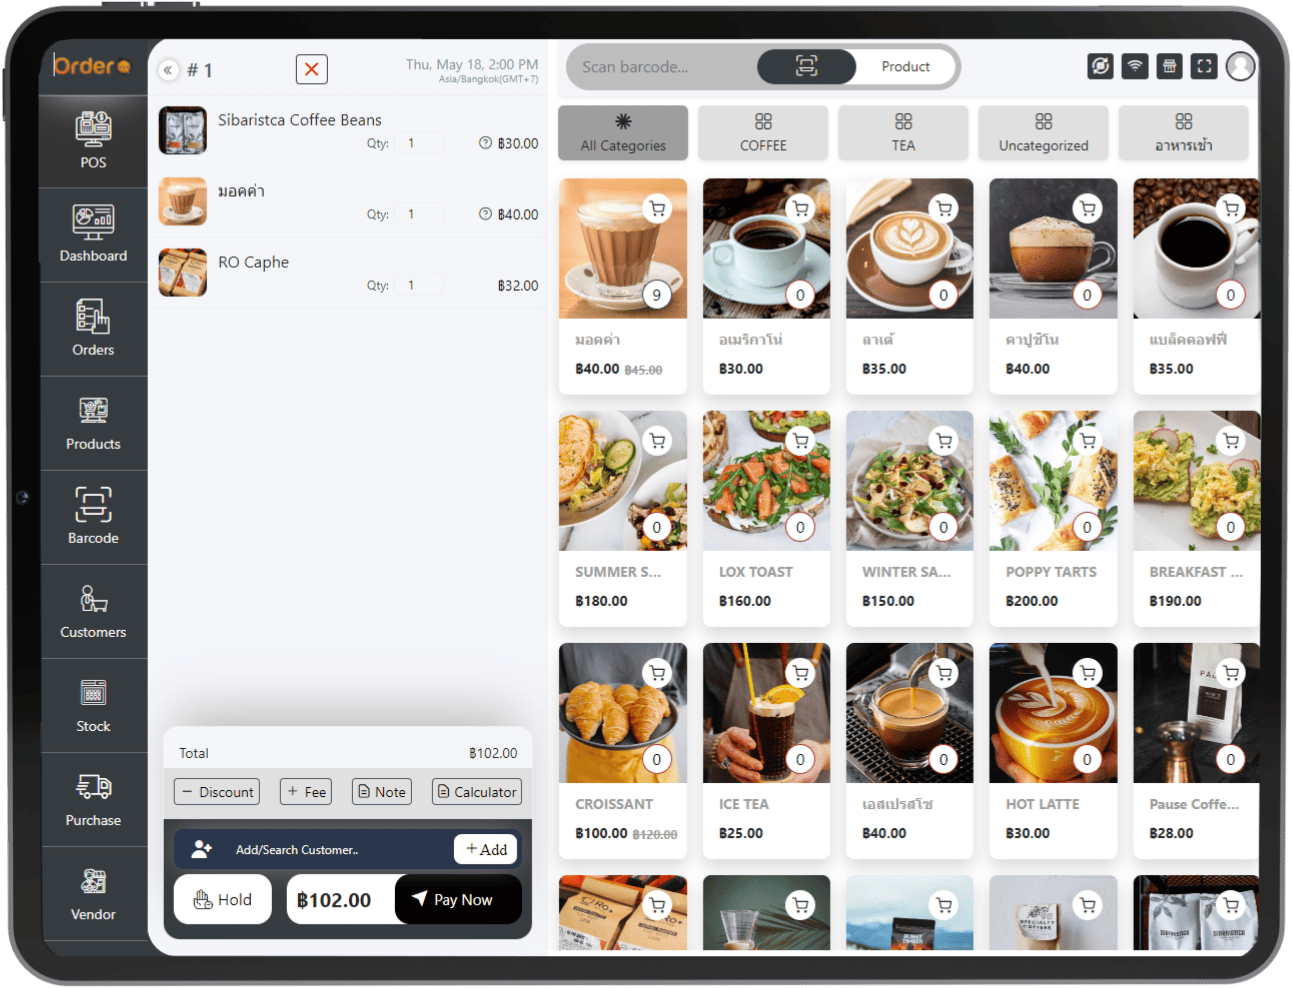 POS features for restaurant system by orderc